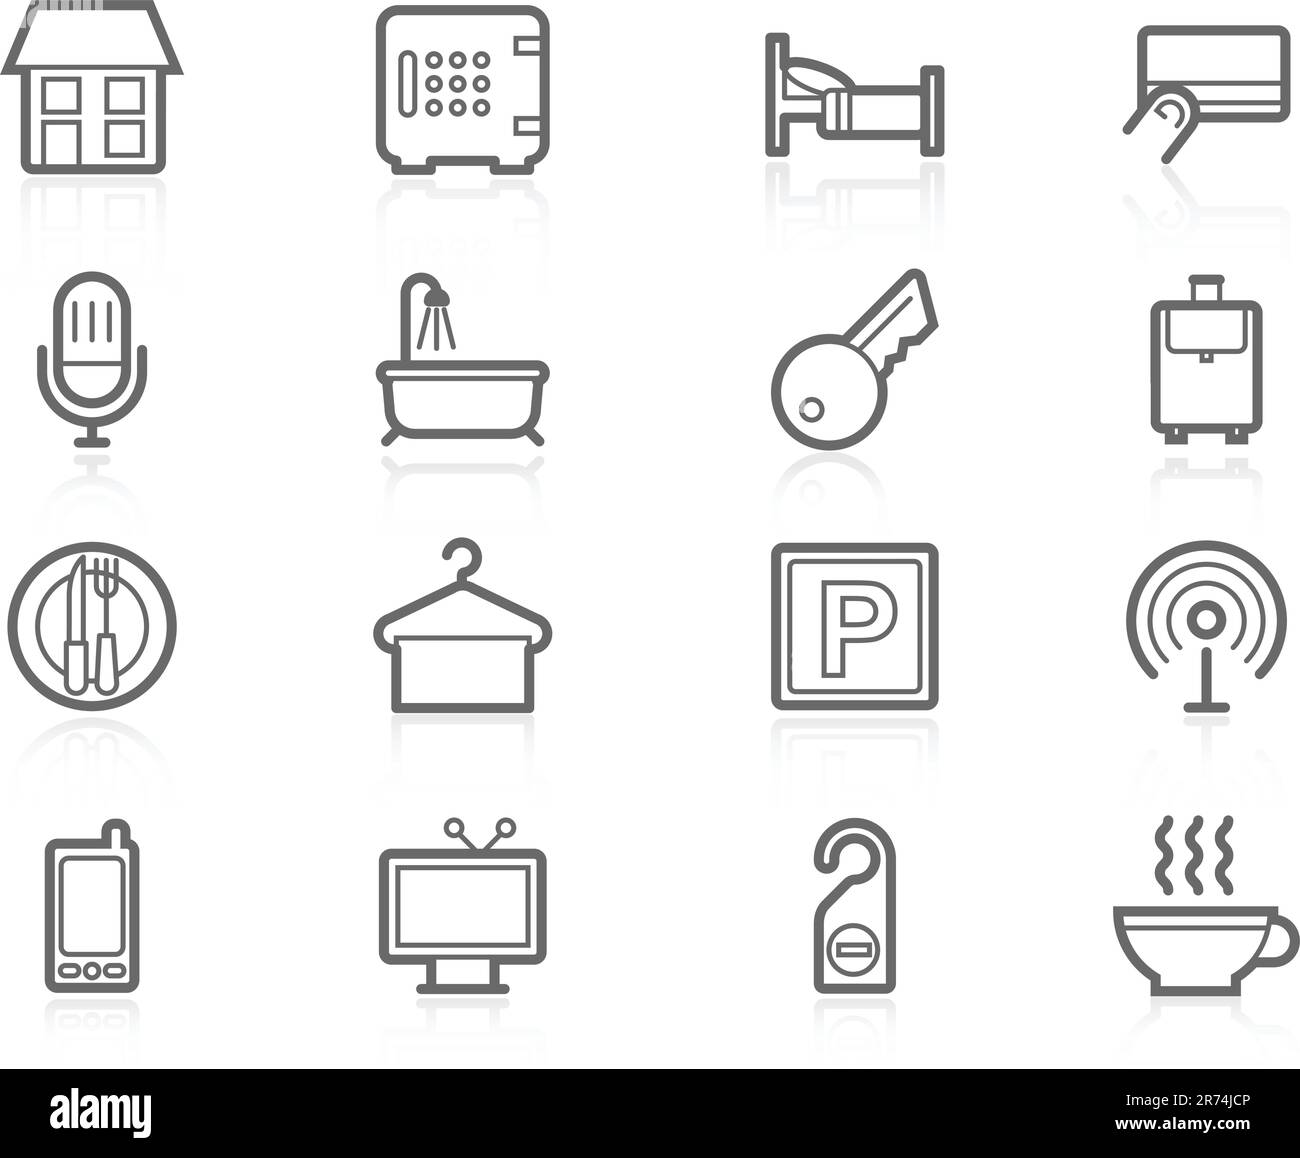 Icon set - Hotel accommodation amenities and services Stock Vector